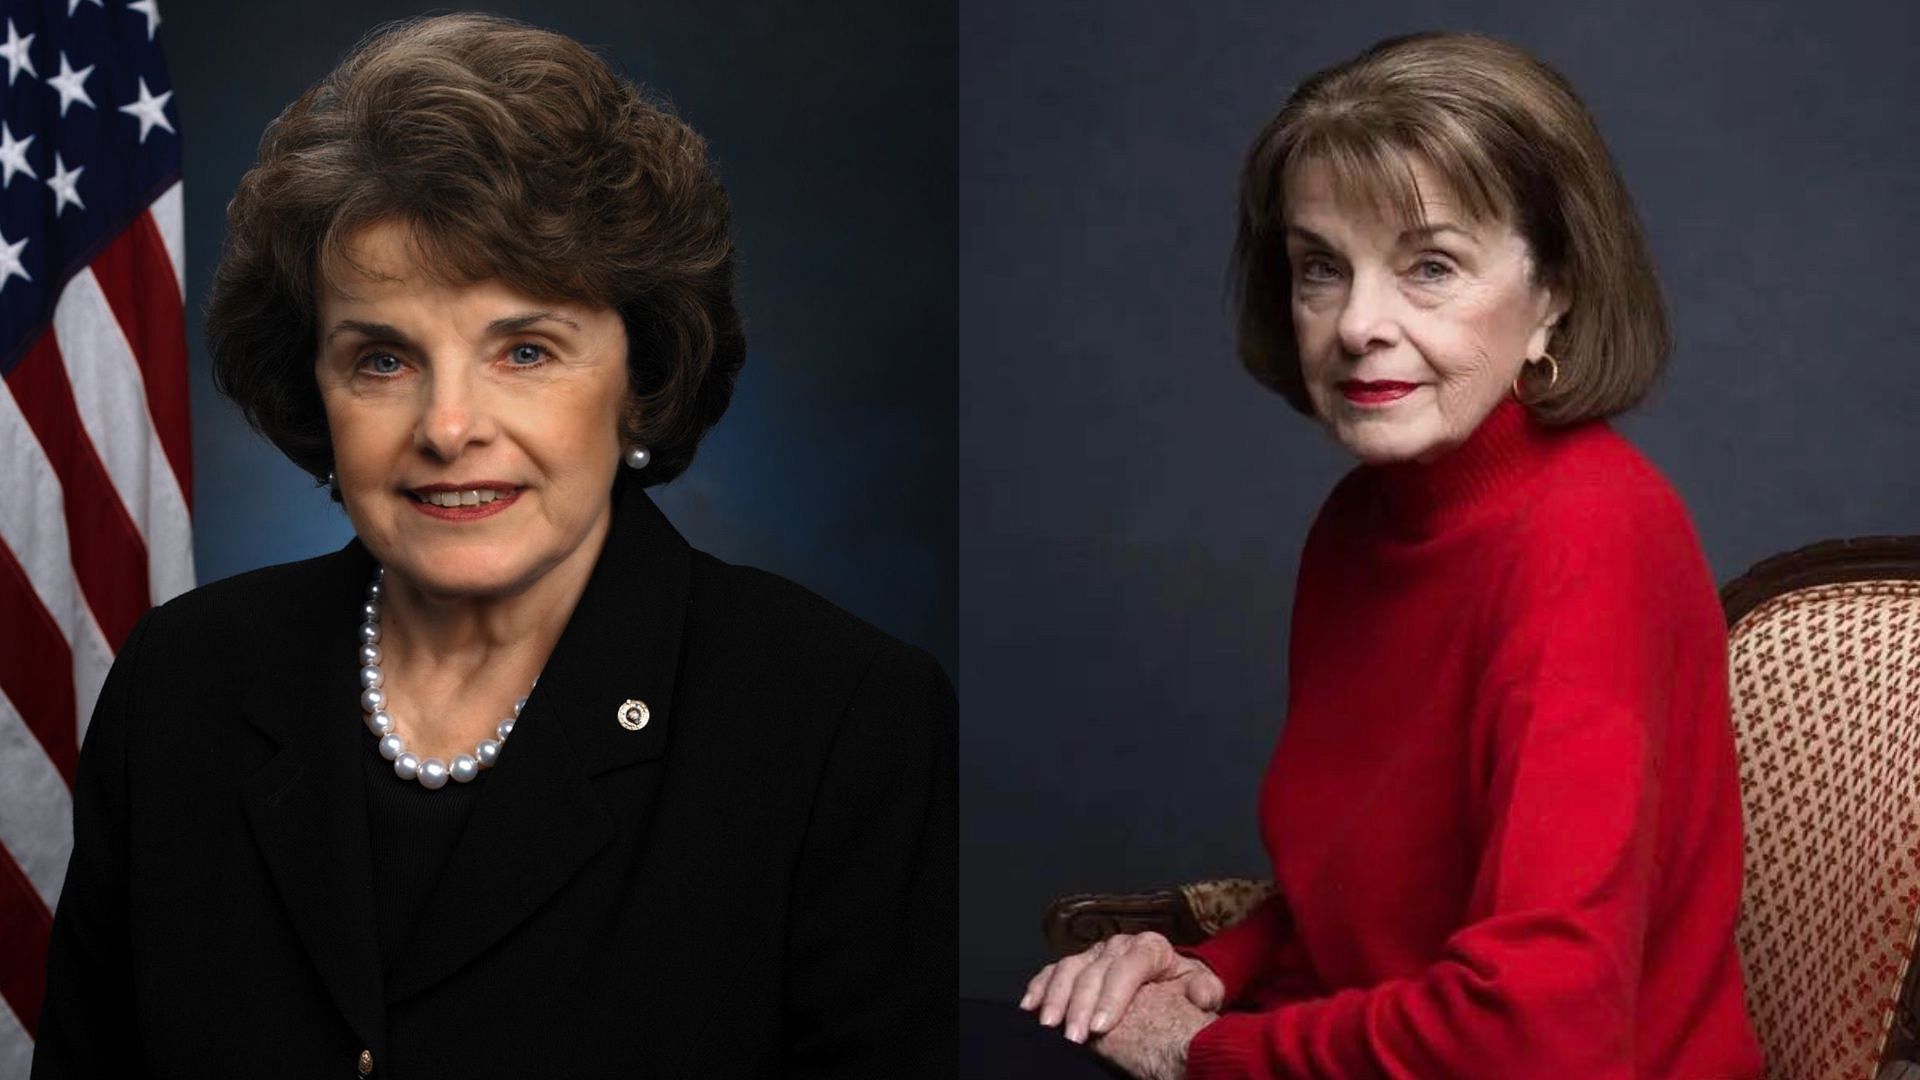 Senator Dianne Feinstein has died at the age of 90. (Images via Twitter/@Andreafreedom76 &amp; Facebook/Gabby Giffords)